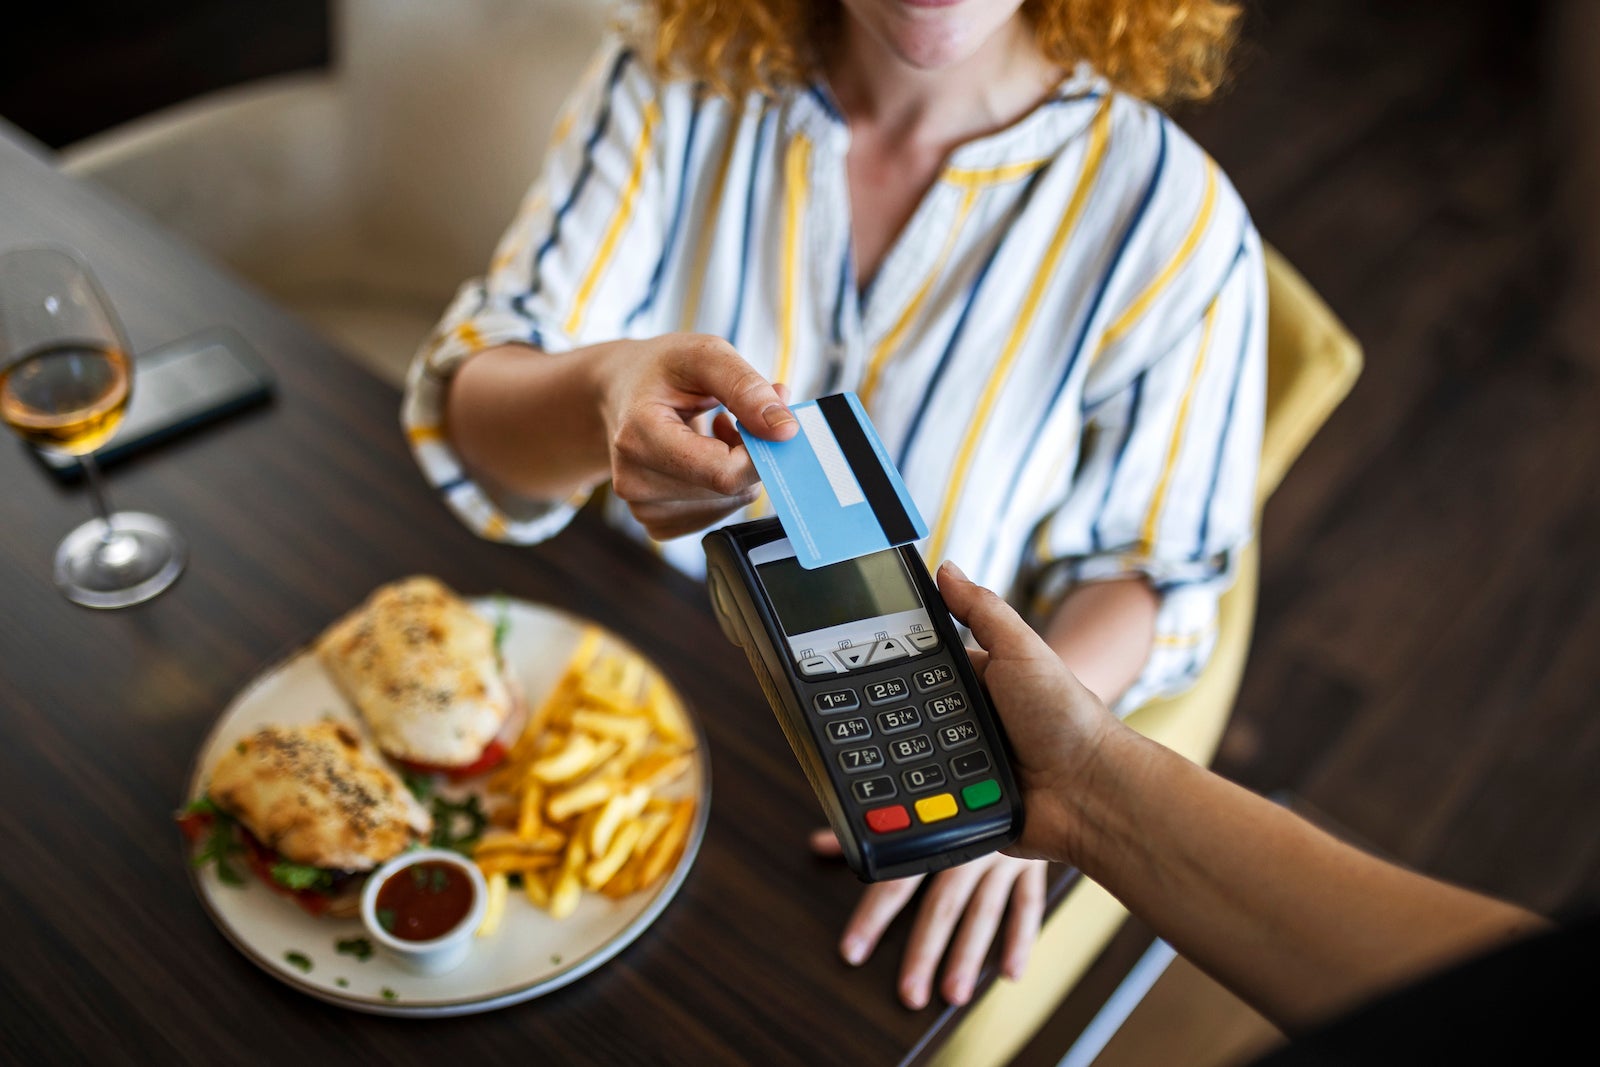 a restaurant customer taps a credit card on a credit card reader to pay for their food